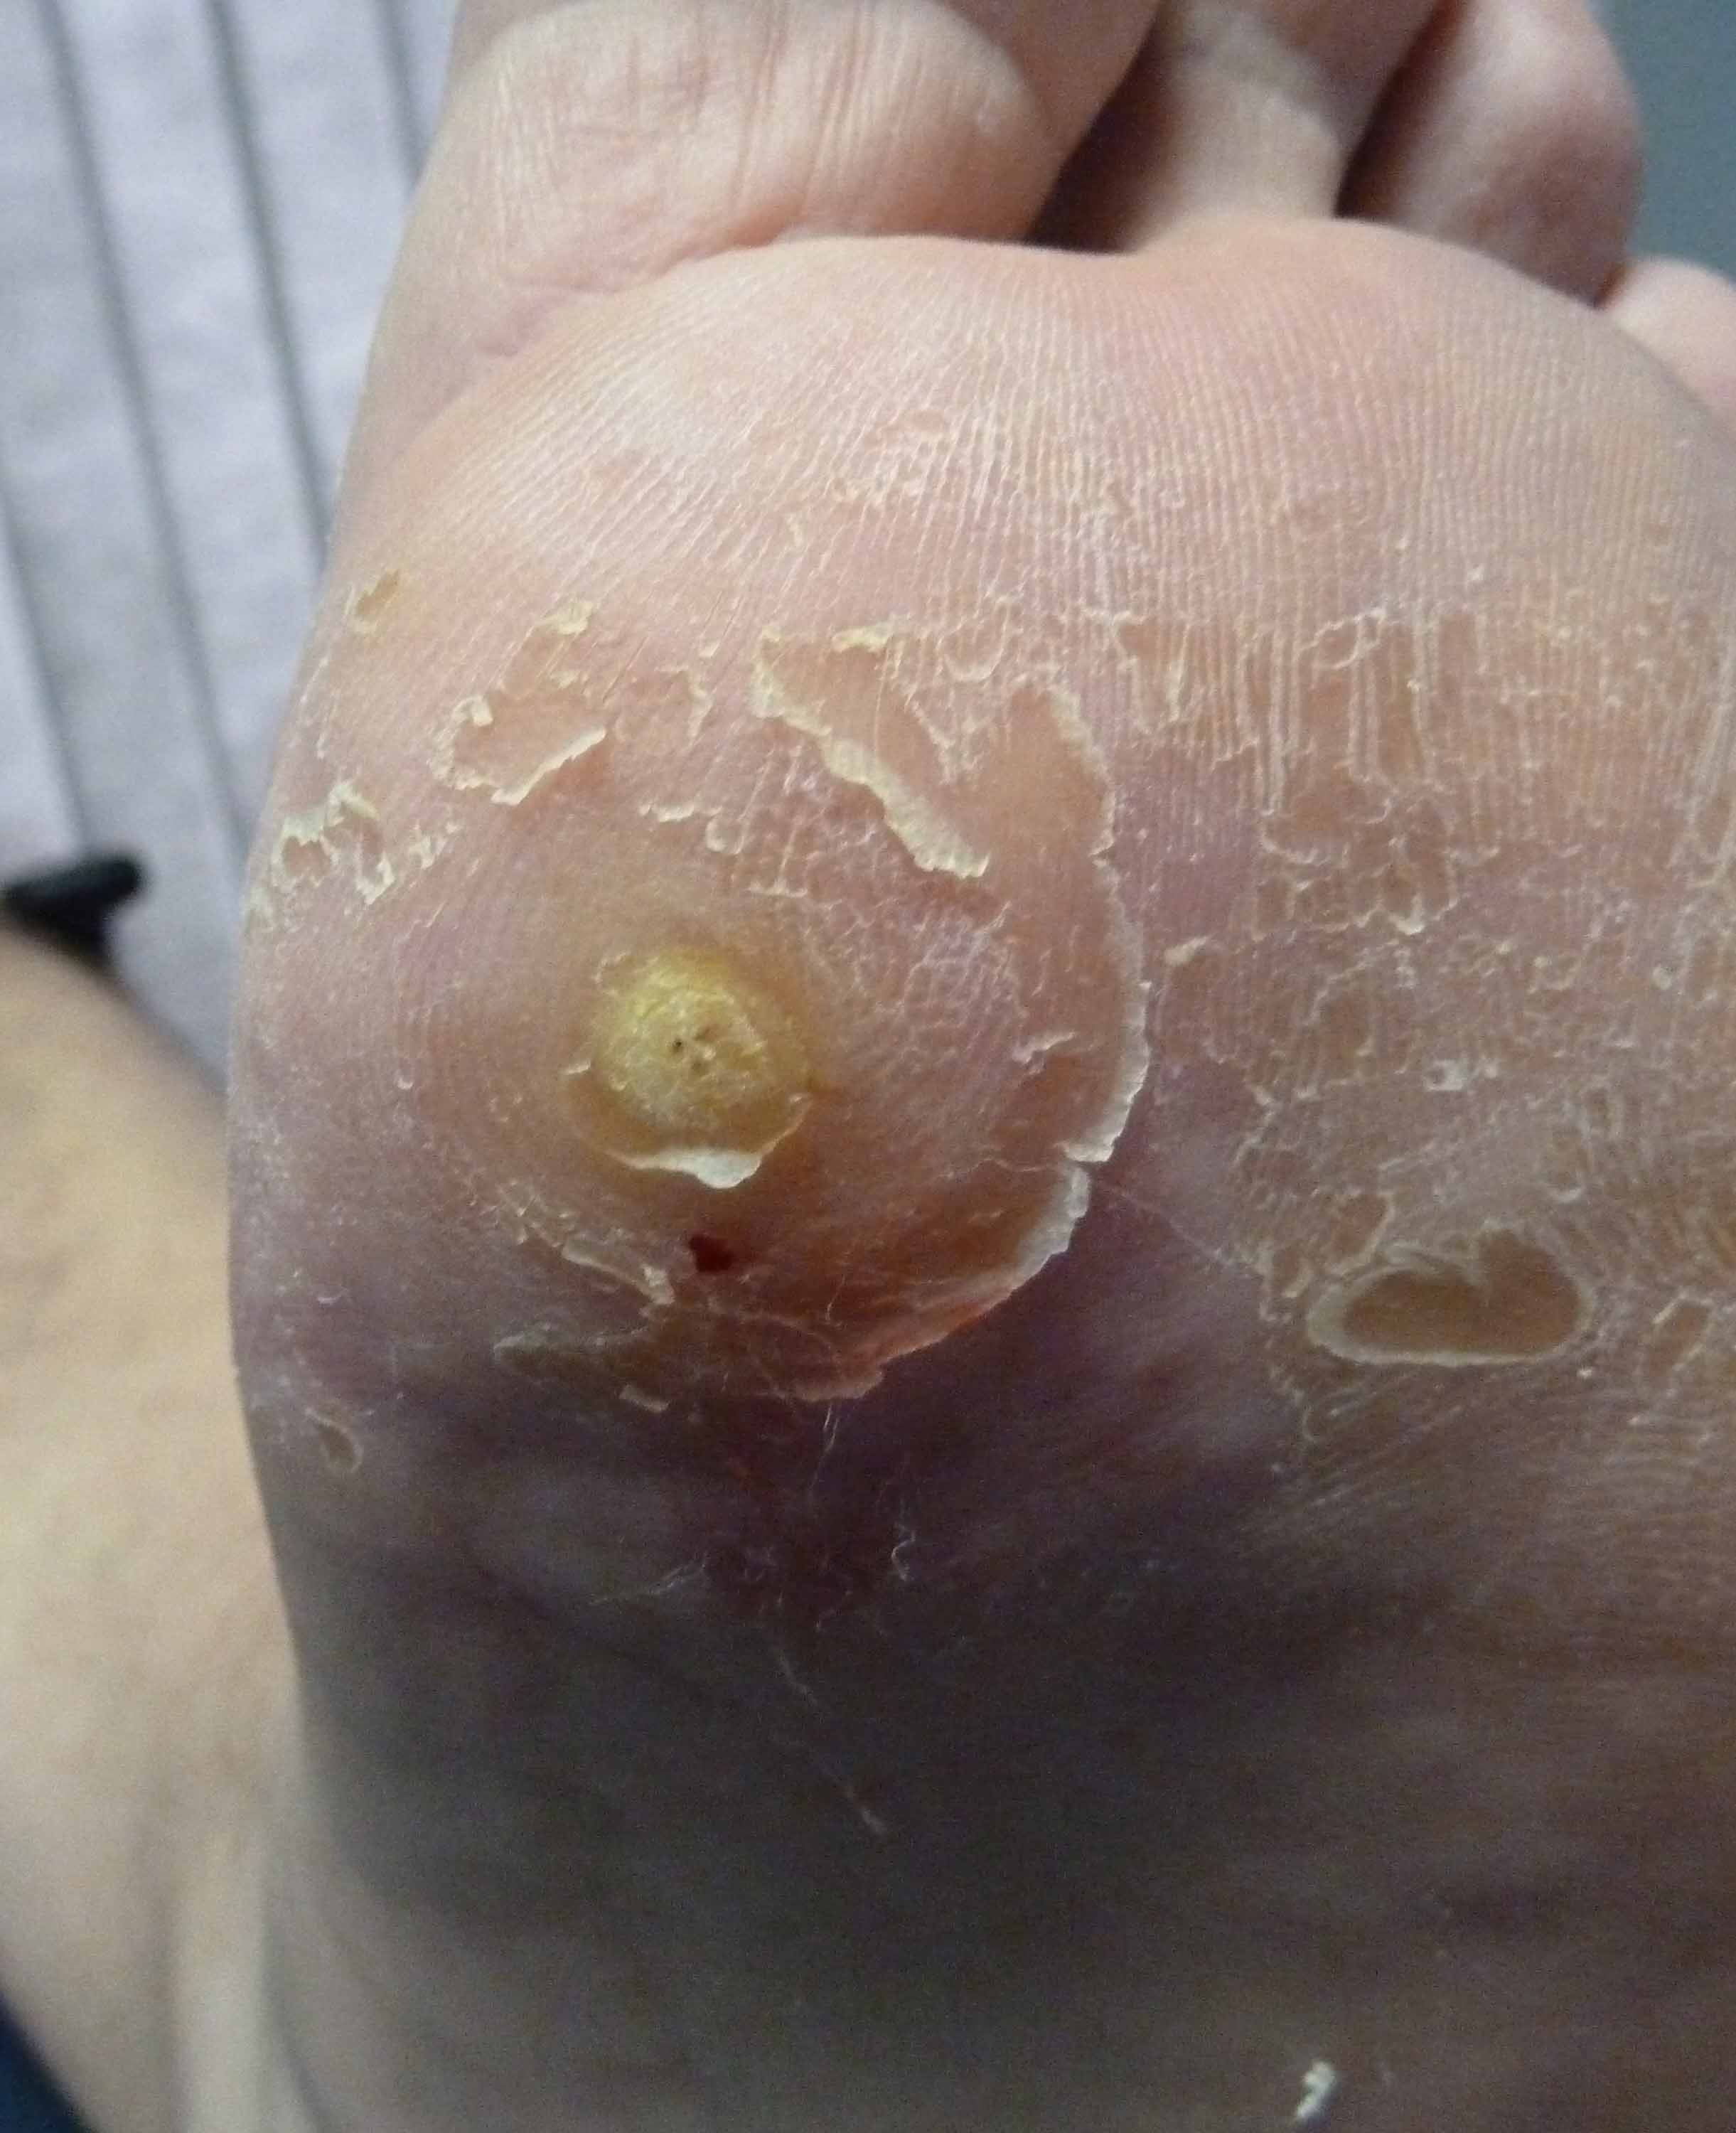 Wart treatment melbourne - RELATED ARTICLES